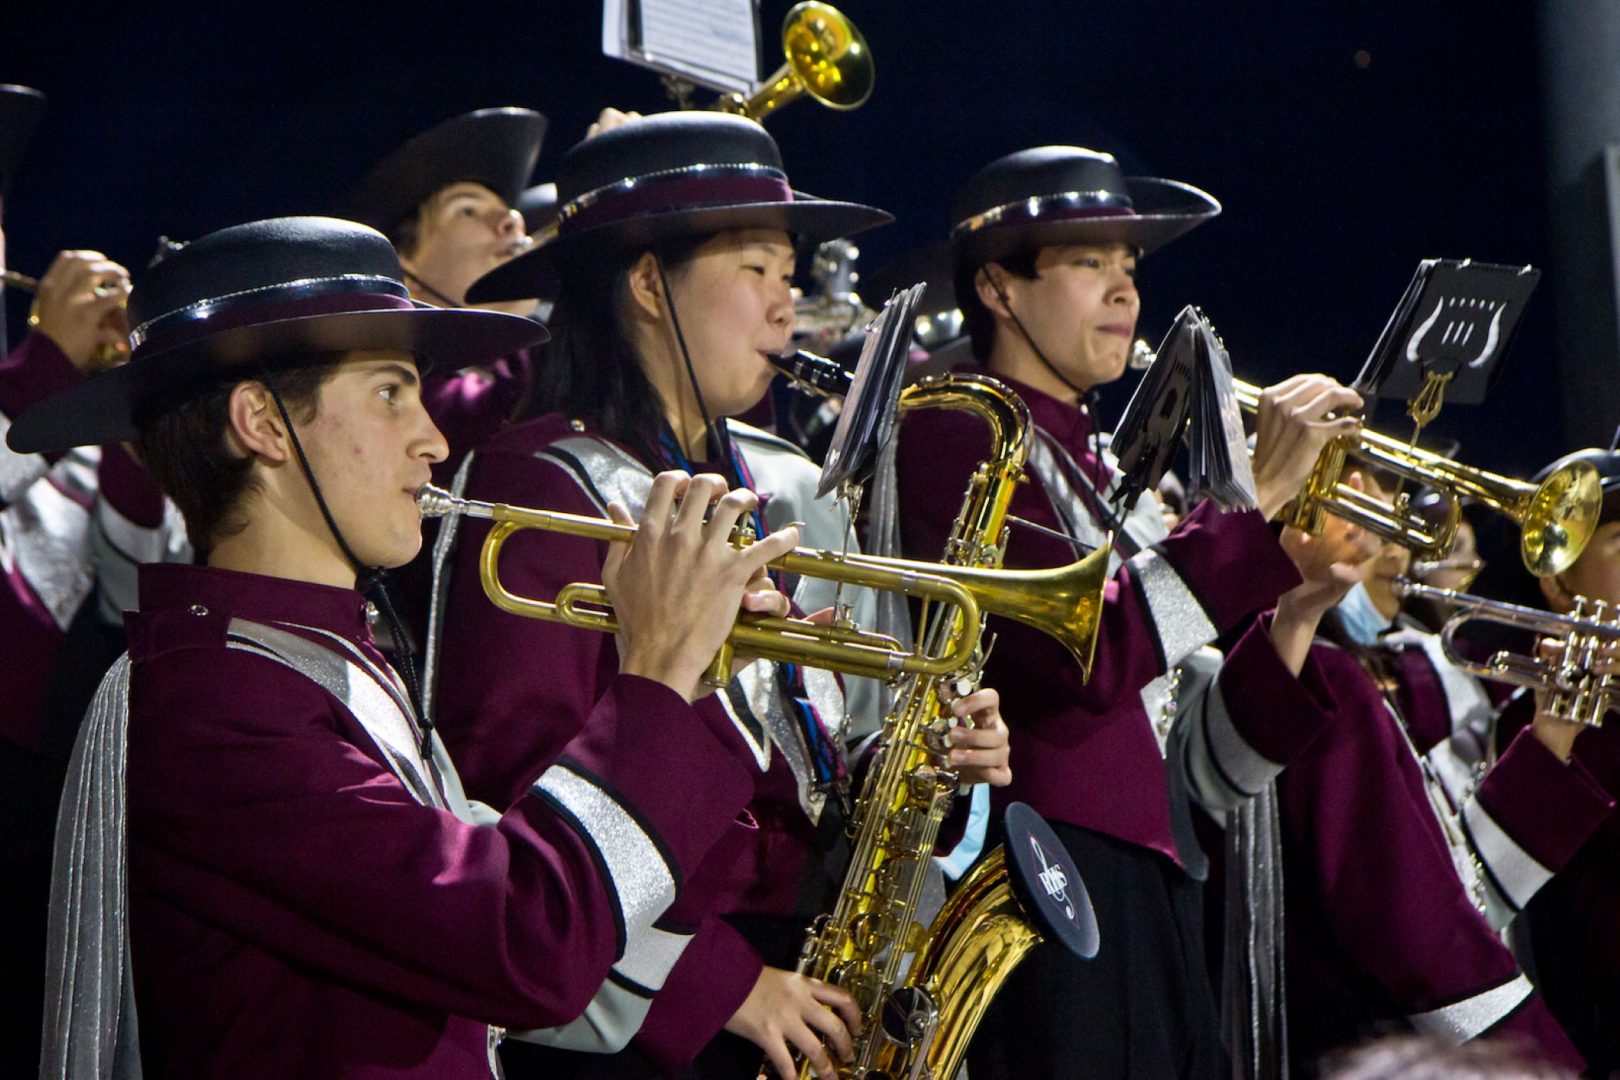 The Radnor High School band plays at the Friday night football game on October 22, 2021. 